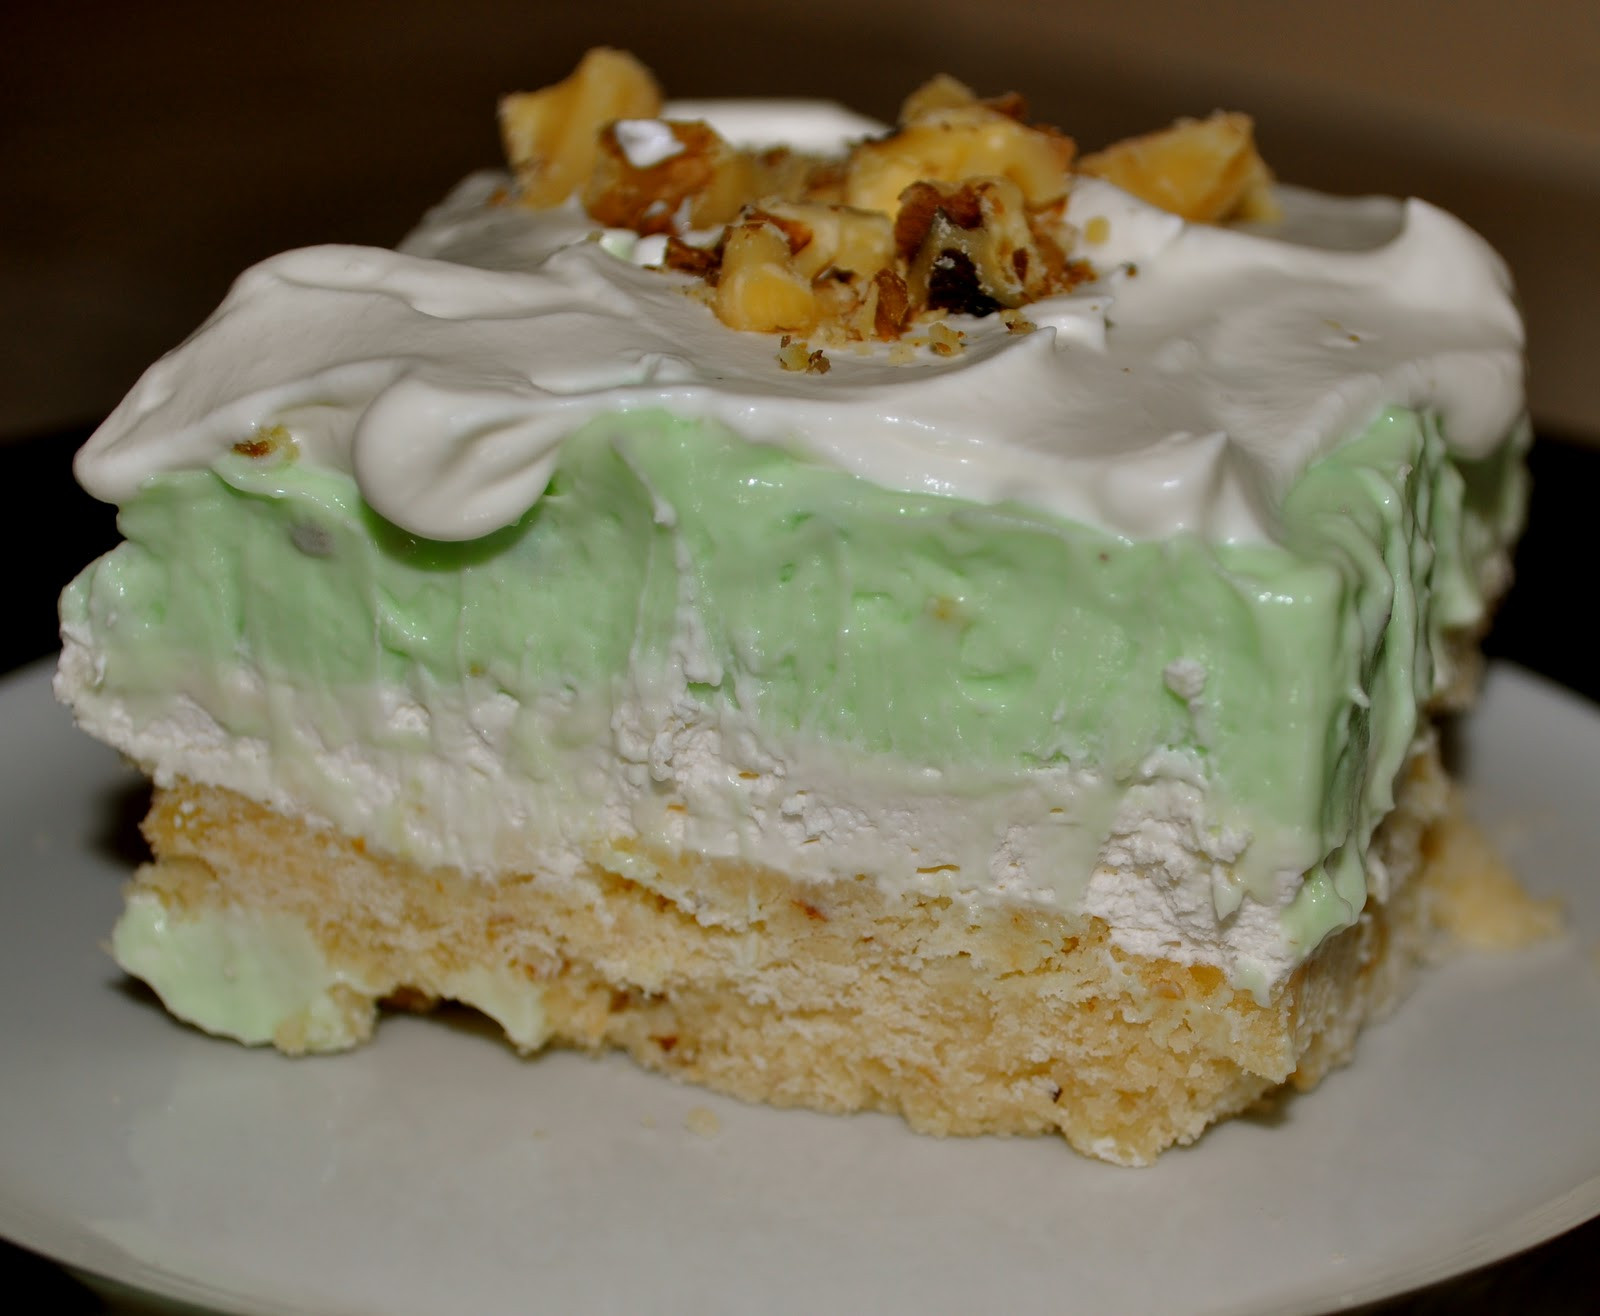 Pistachio Dessert Recipes
 Inspiring Creations Food For Thought Tuesday Pistachio